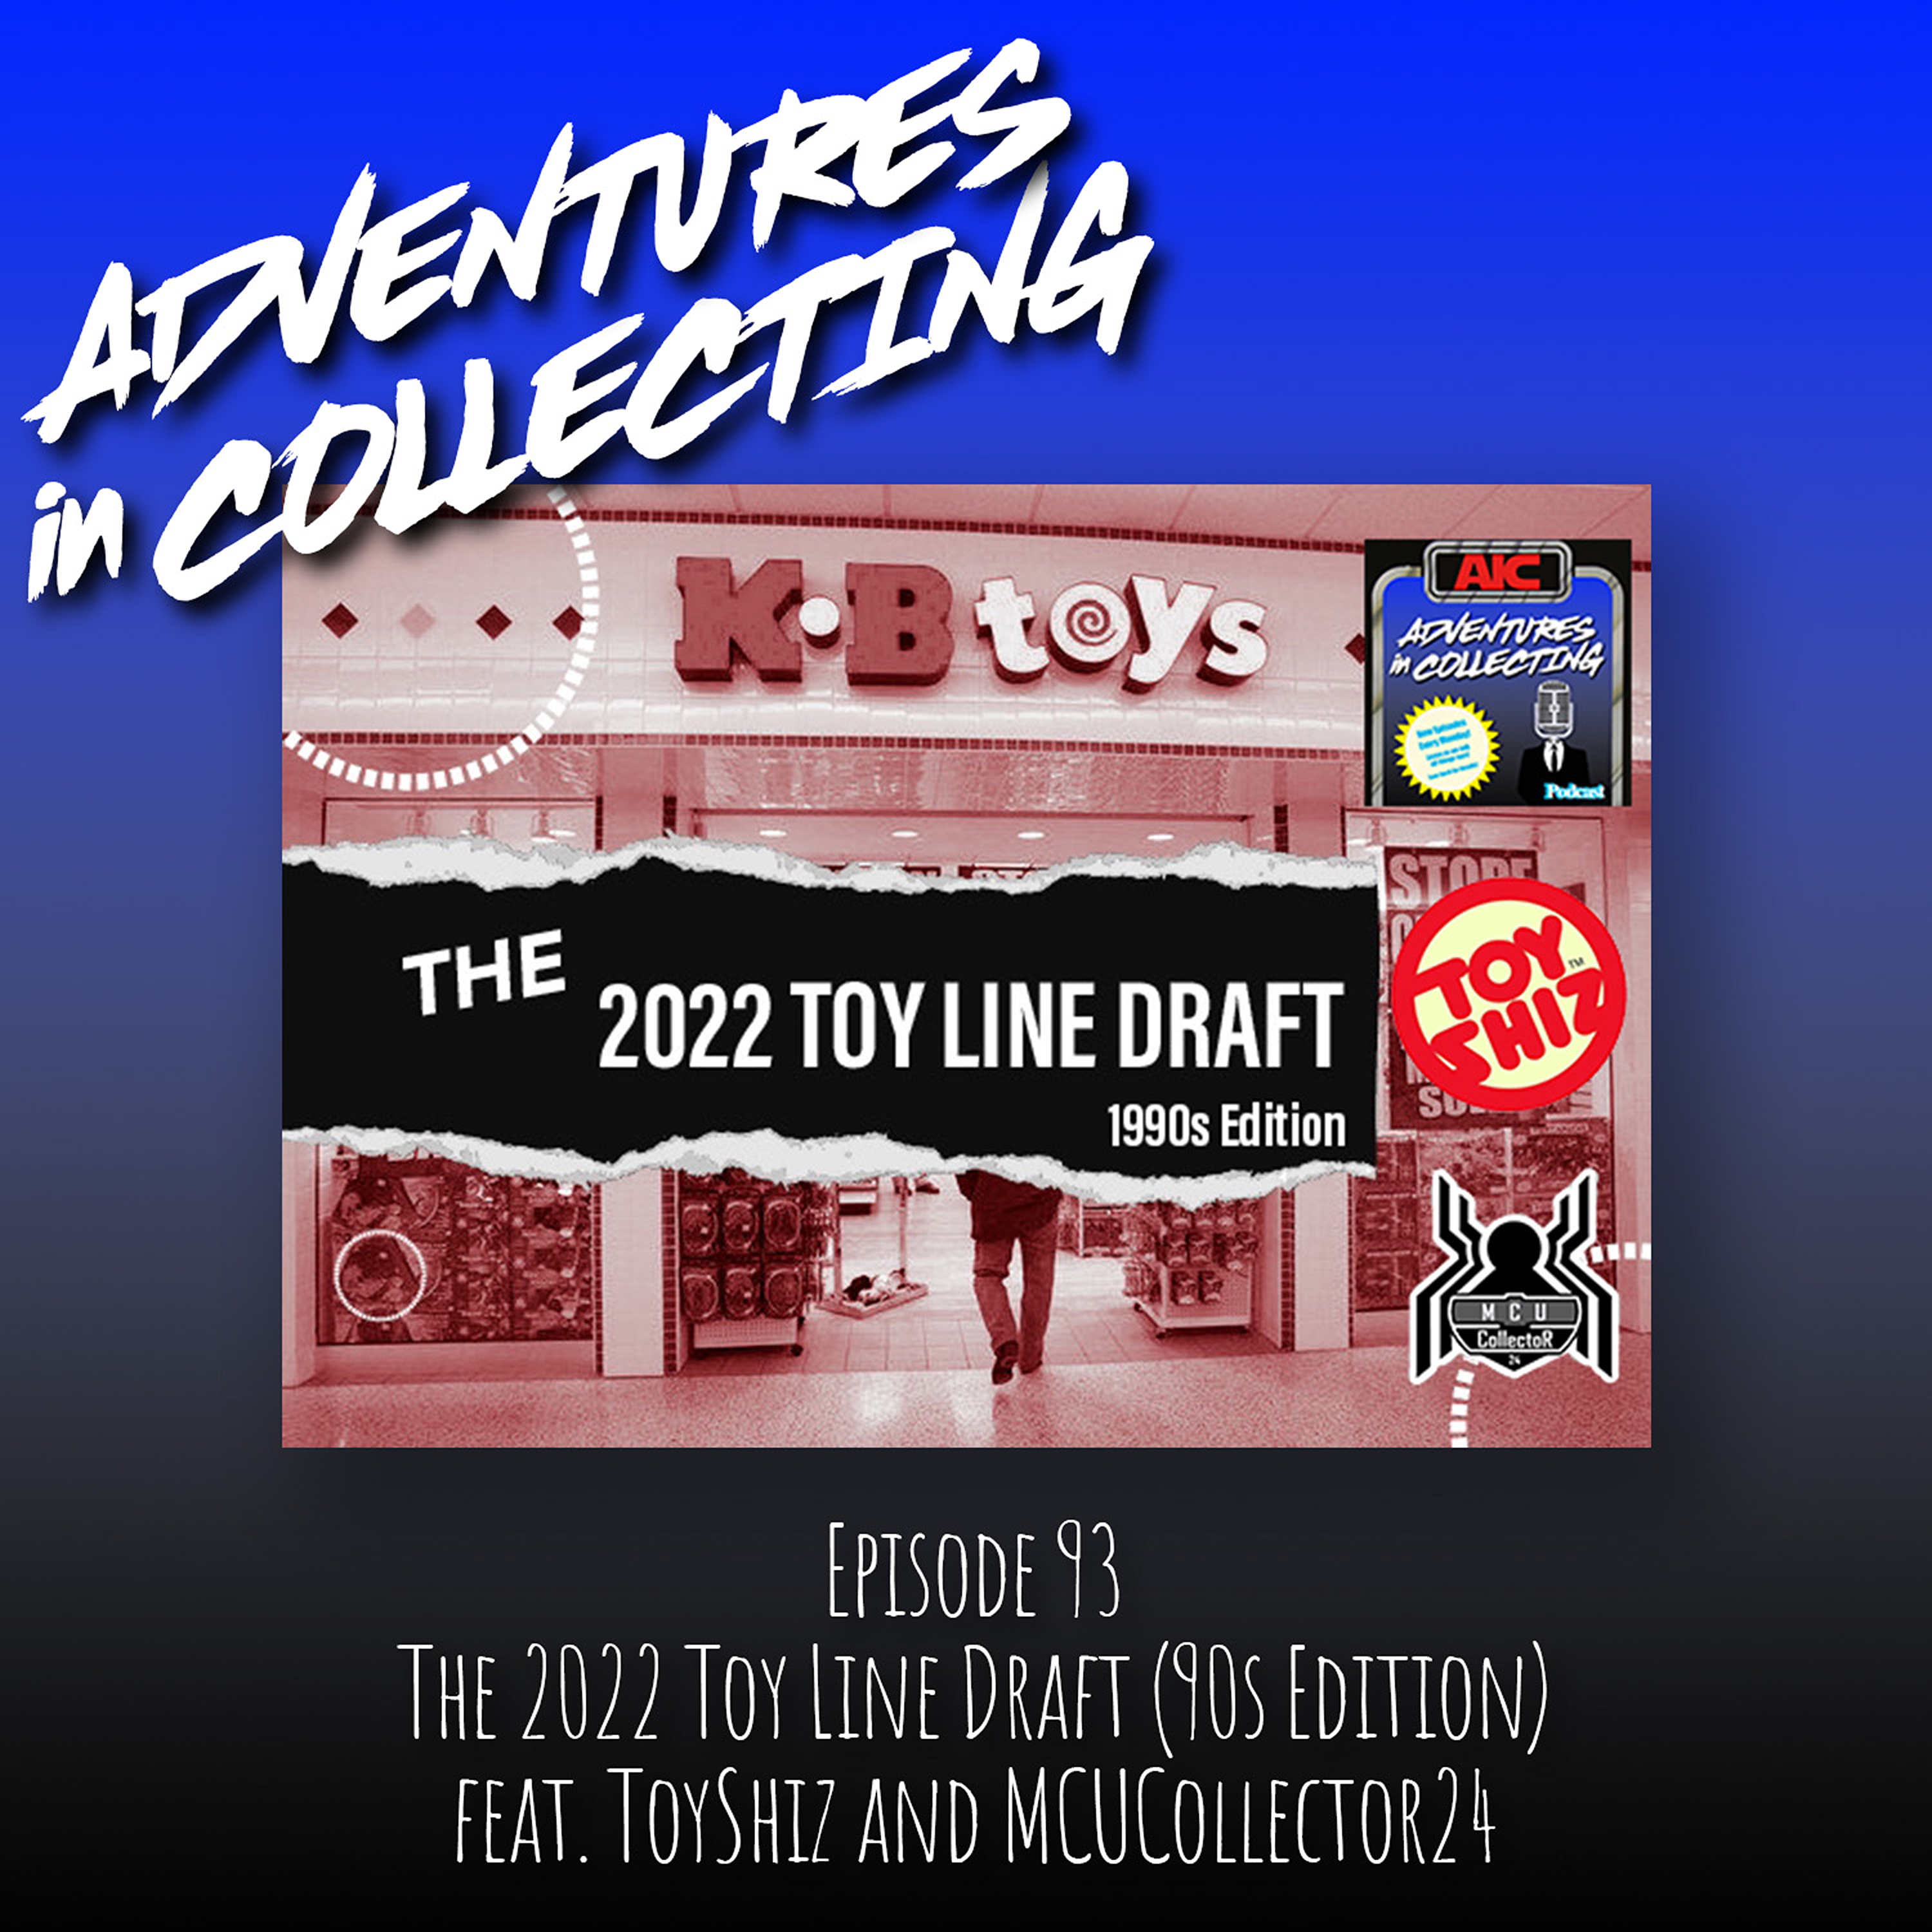 The 2022 Toy Line Draft (1990's Edition) Feat. ToyShiz and MCUCollector24